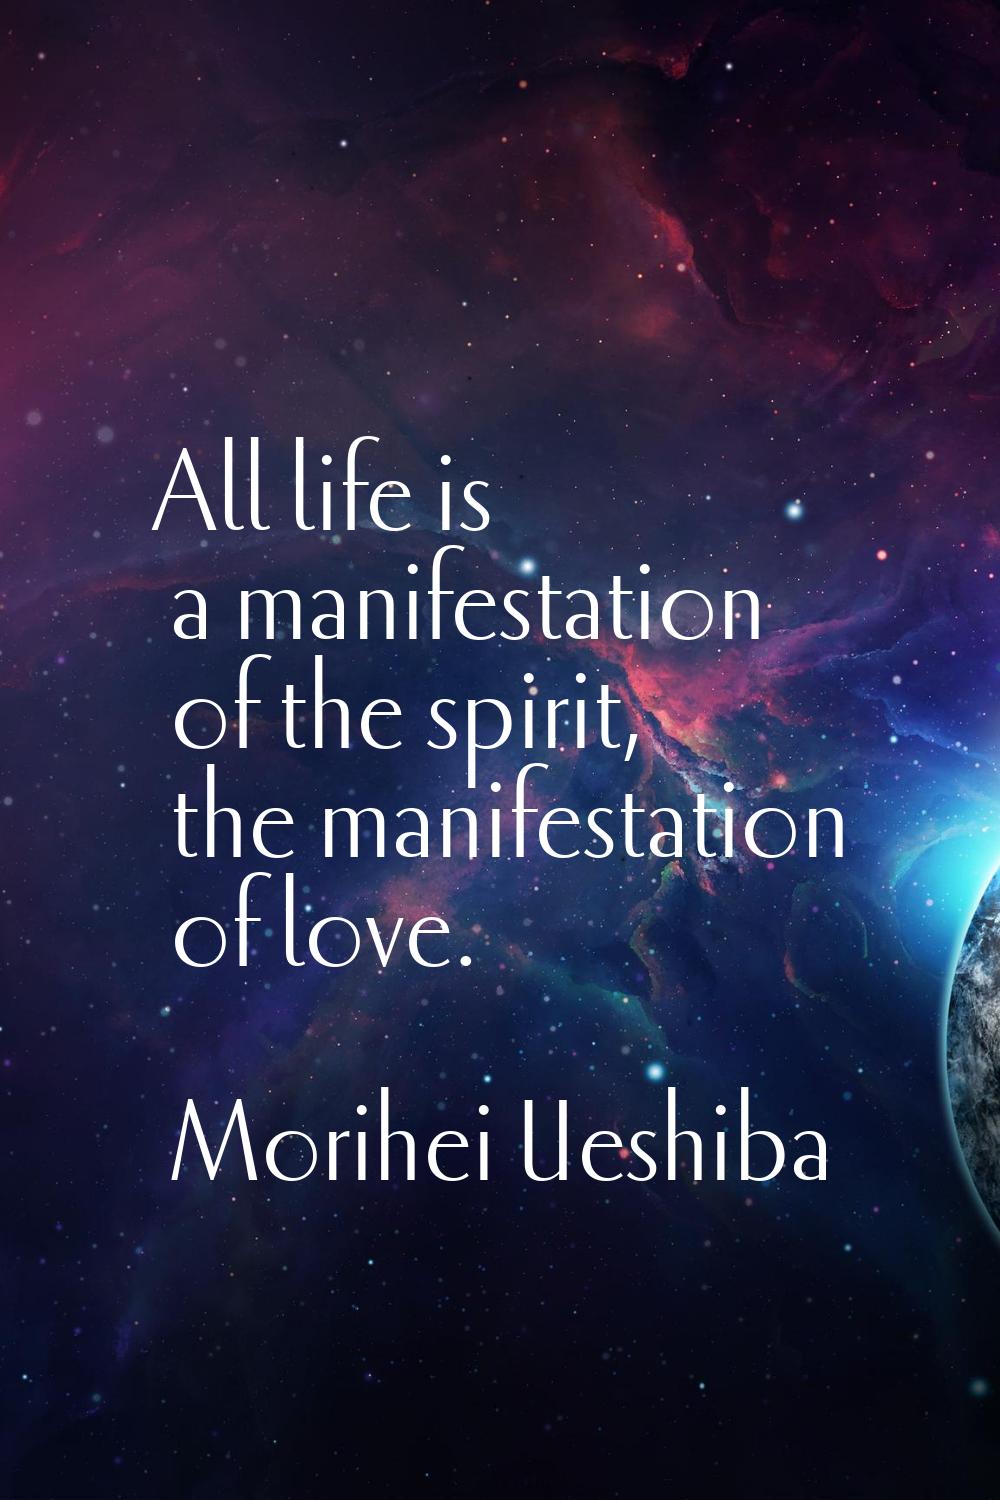 All life is a manifestation of the spirit, the manifestation of love.